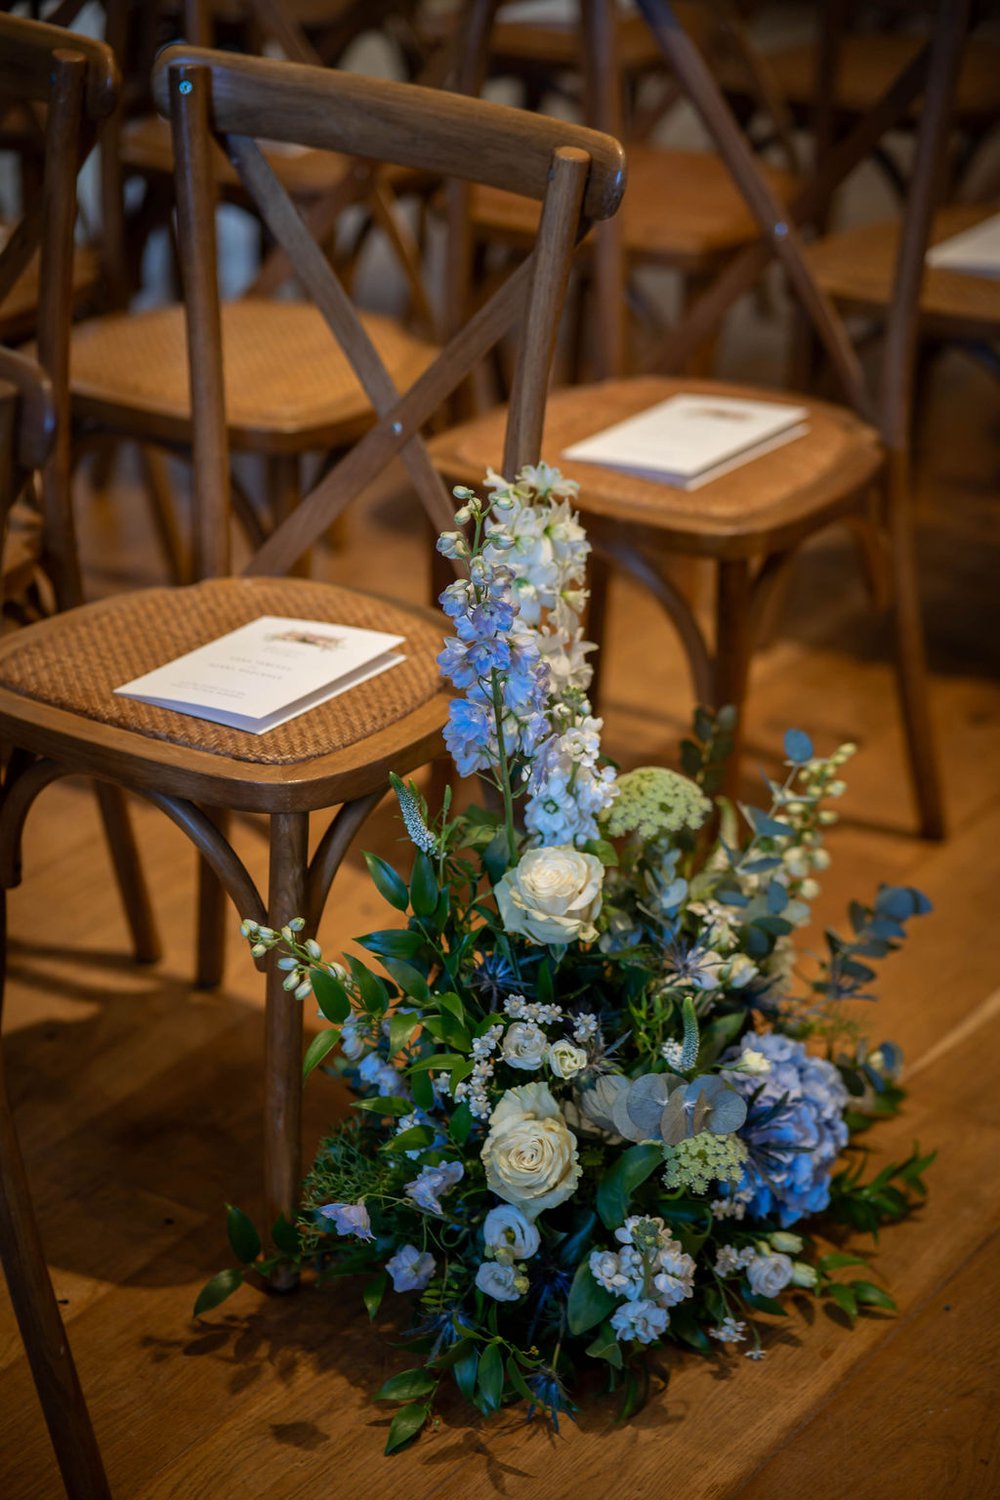 Aisle meadow flower designs in the ceremony room at Primrose Hill Farm